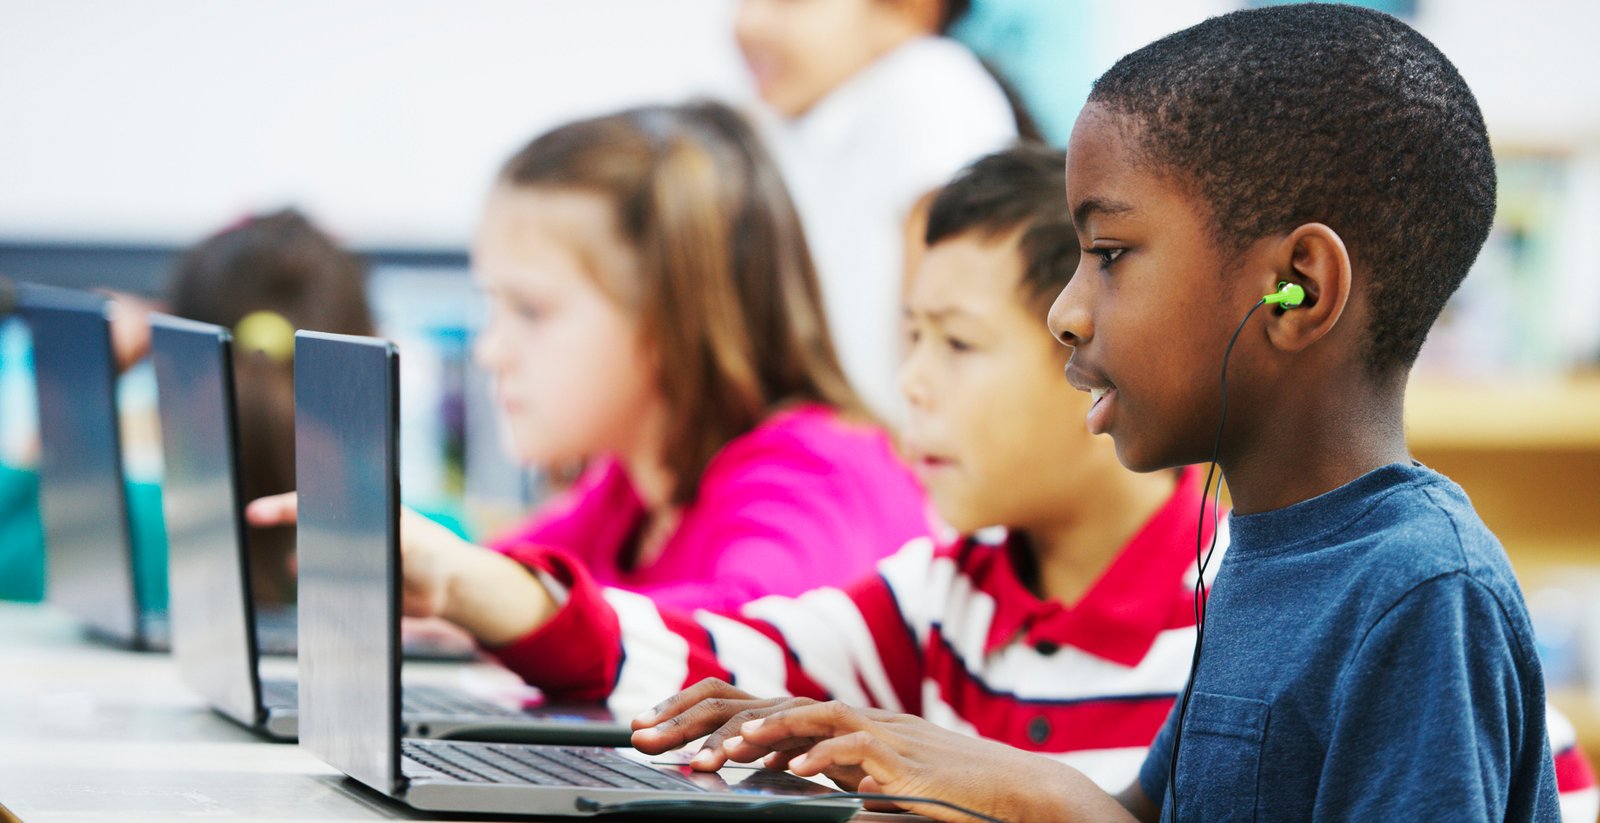 How to Help Kids to Get a Good Computing Education at School